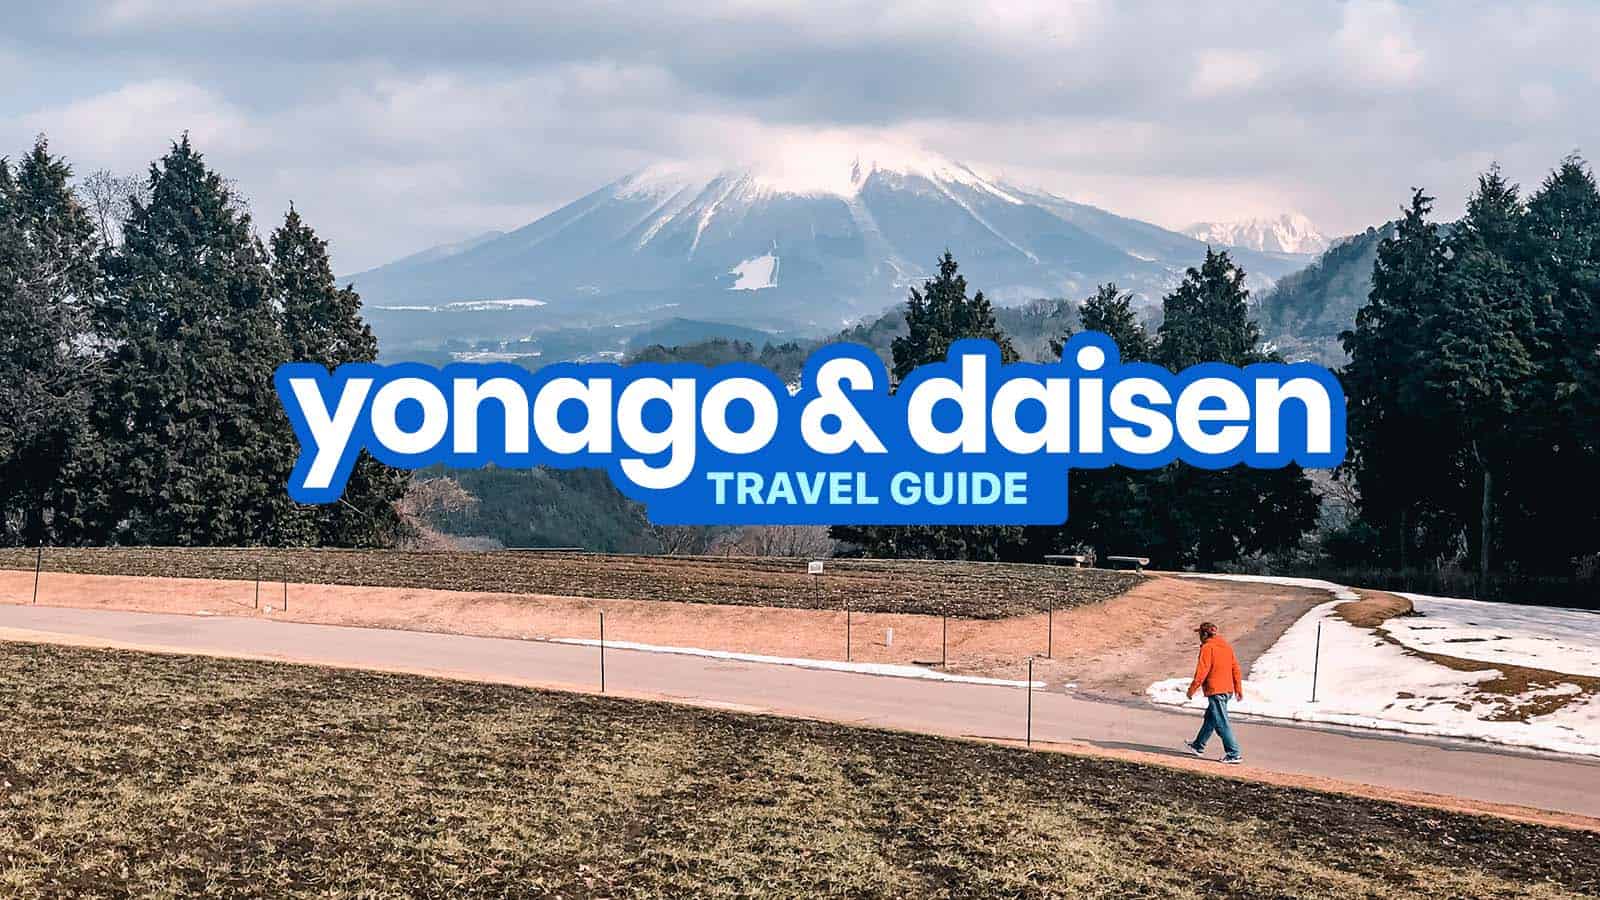 YONAGO & daisentravel Guide & Budget Itinerary